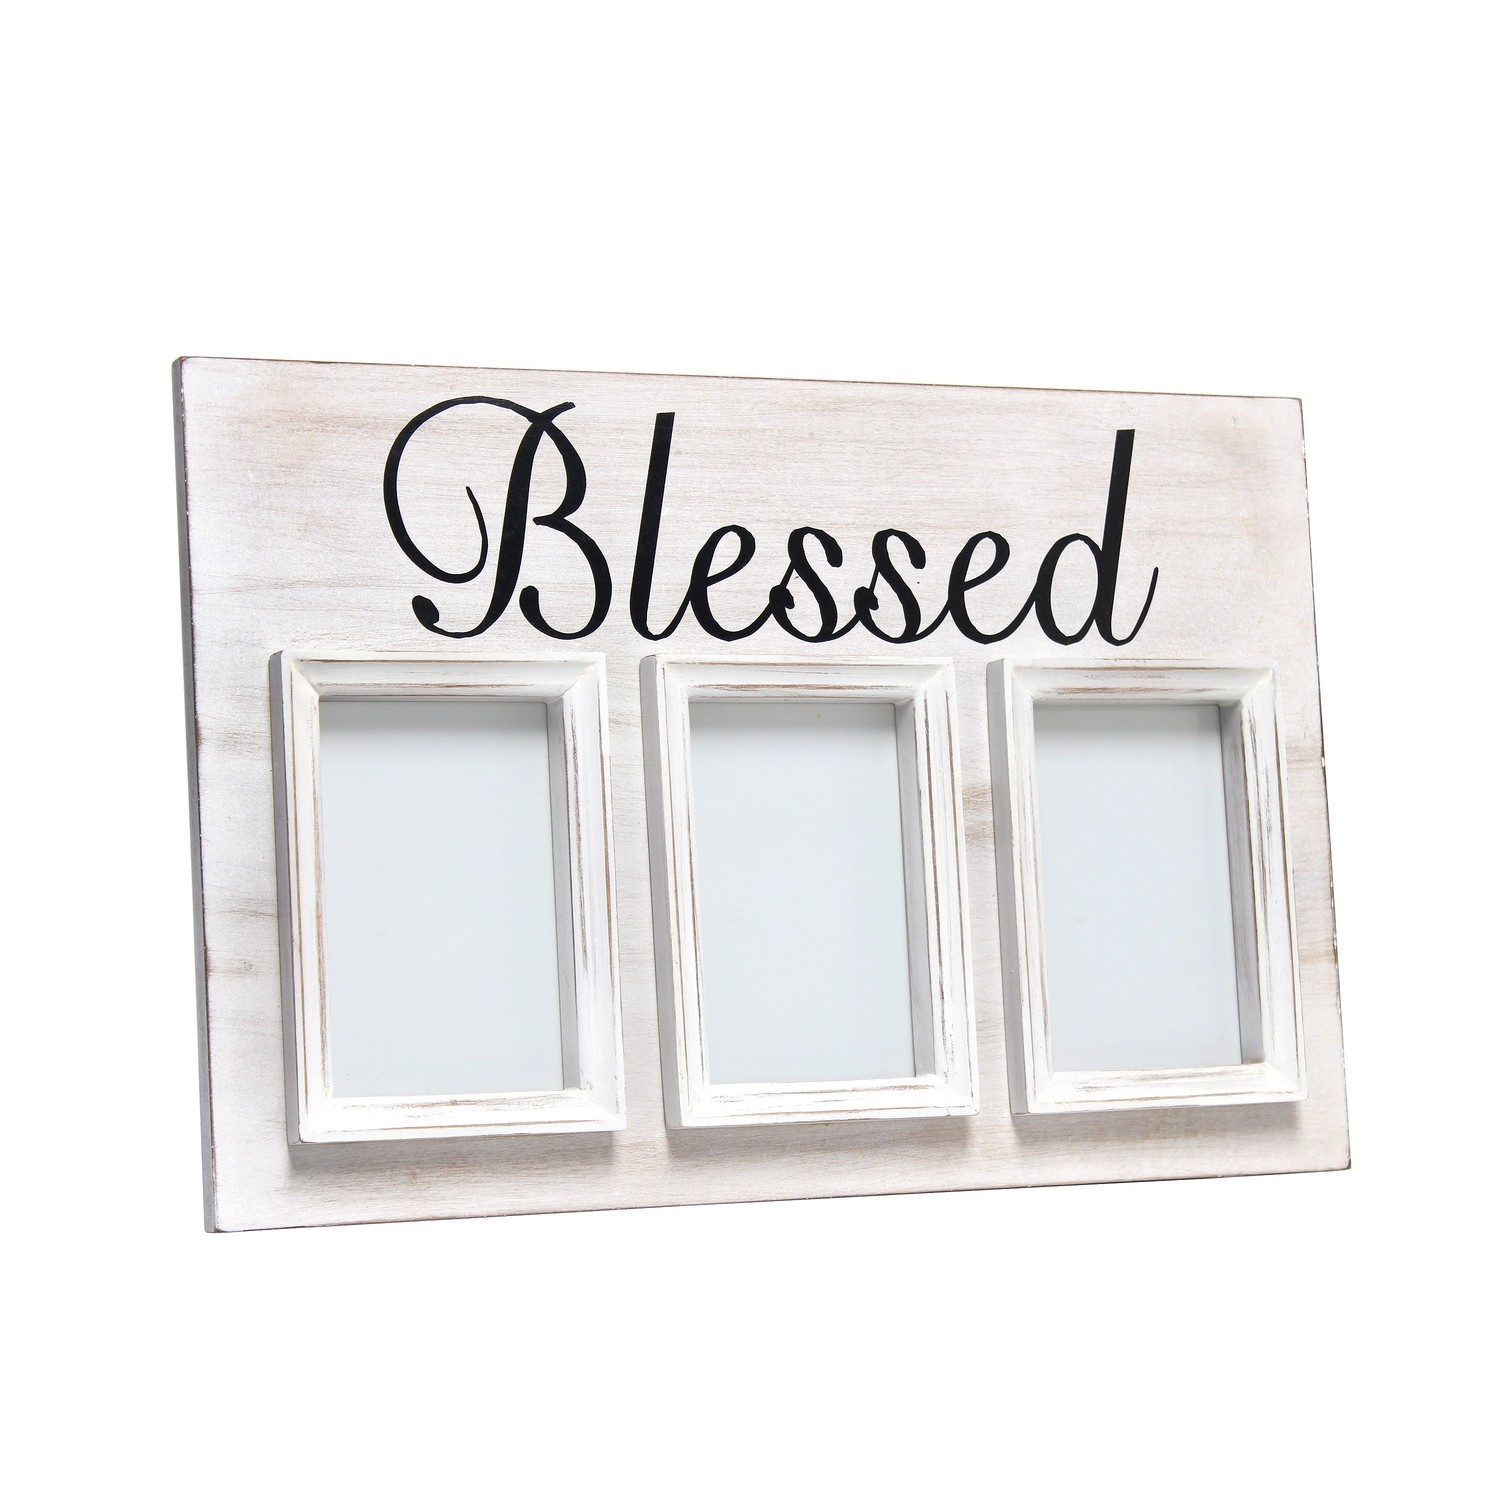 Elegant Designs 3 Photo Collage Frame 4x6 Picture Frame, White Wash "Blessed"